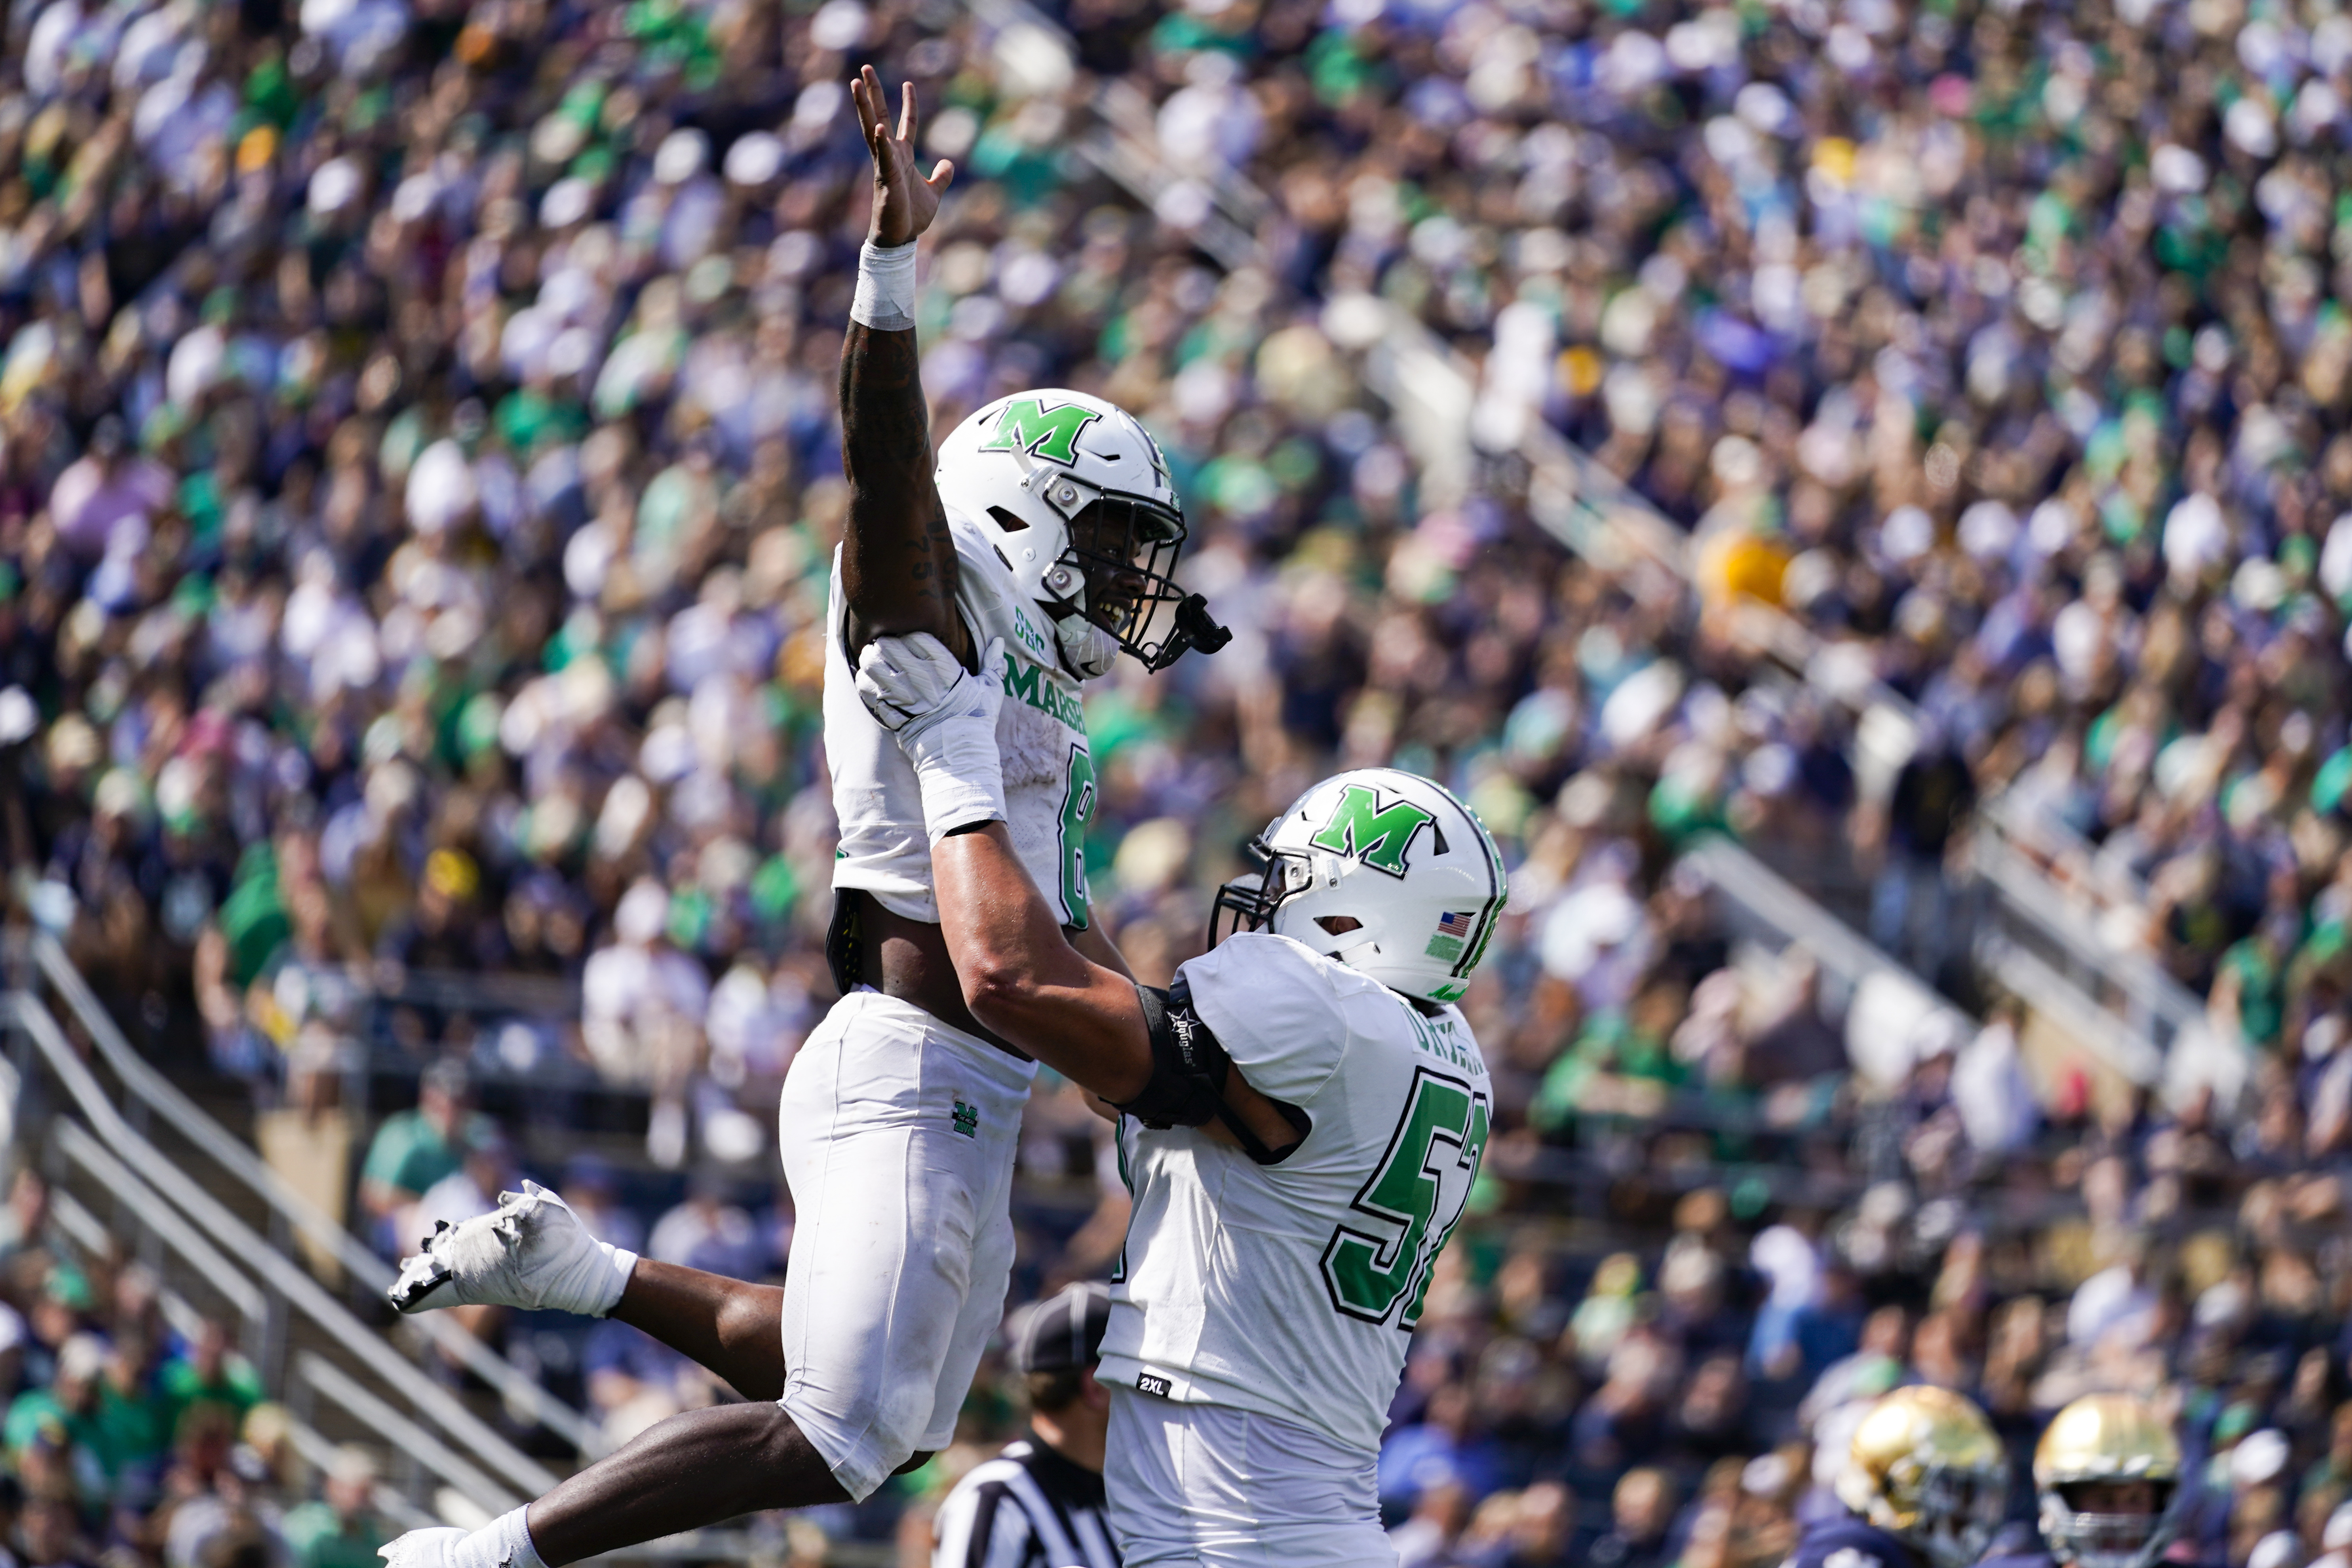 Marshall-UConn live stream (12/19) How to watch Myrtle Beach Bowl online, TV, time